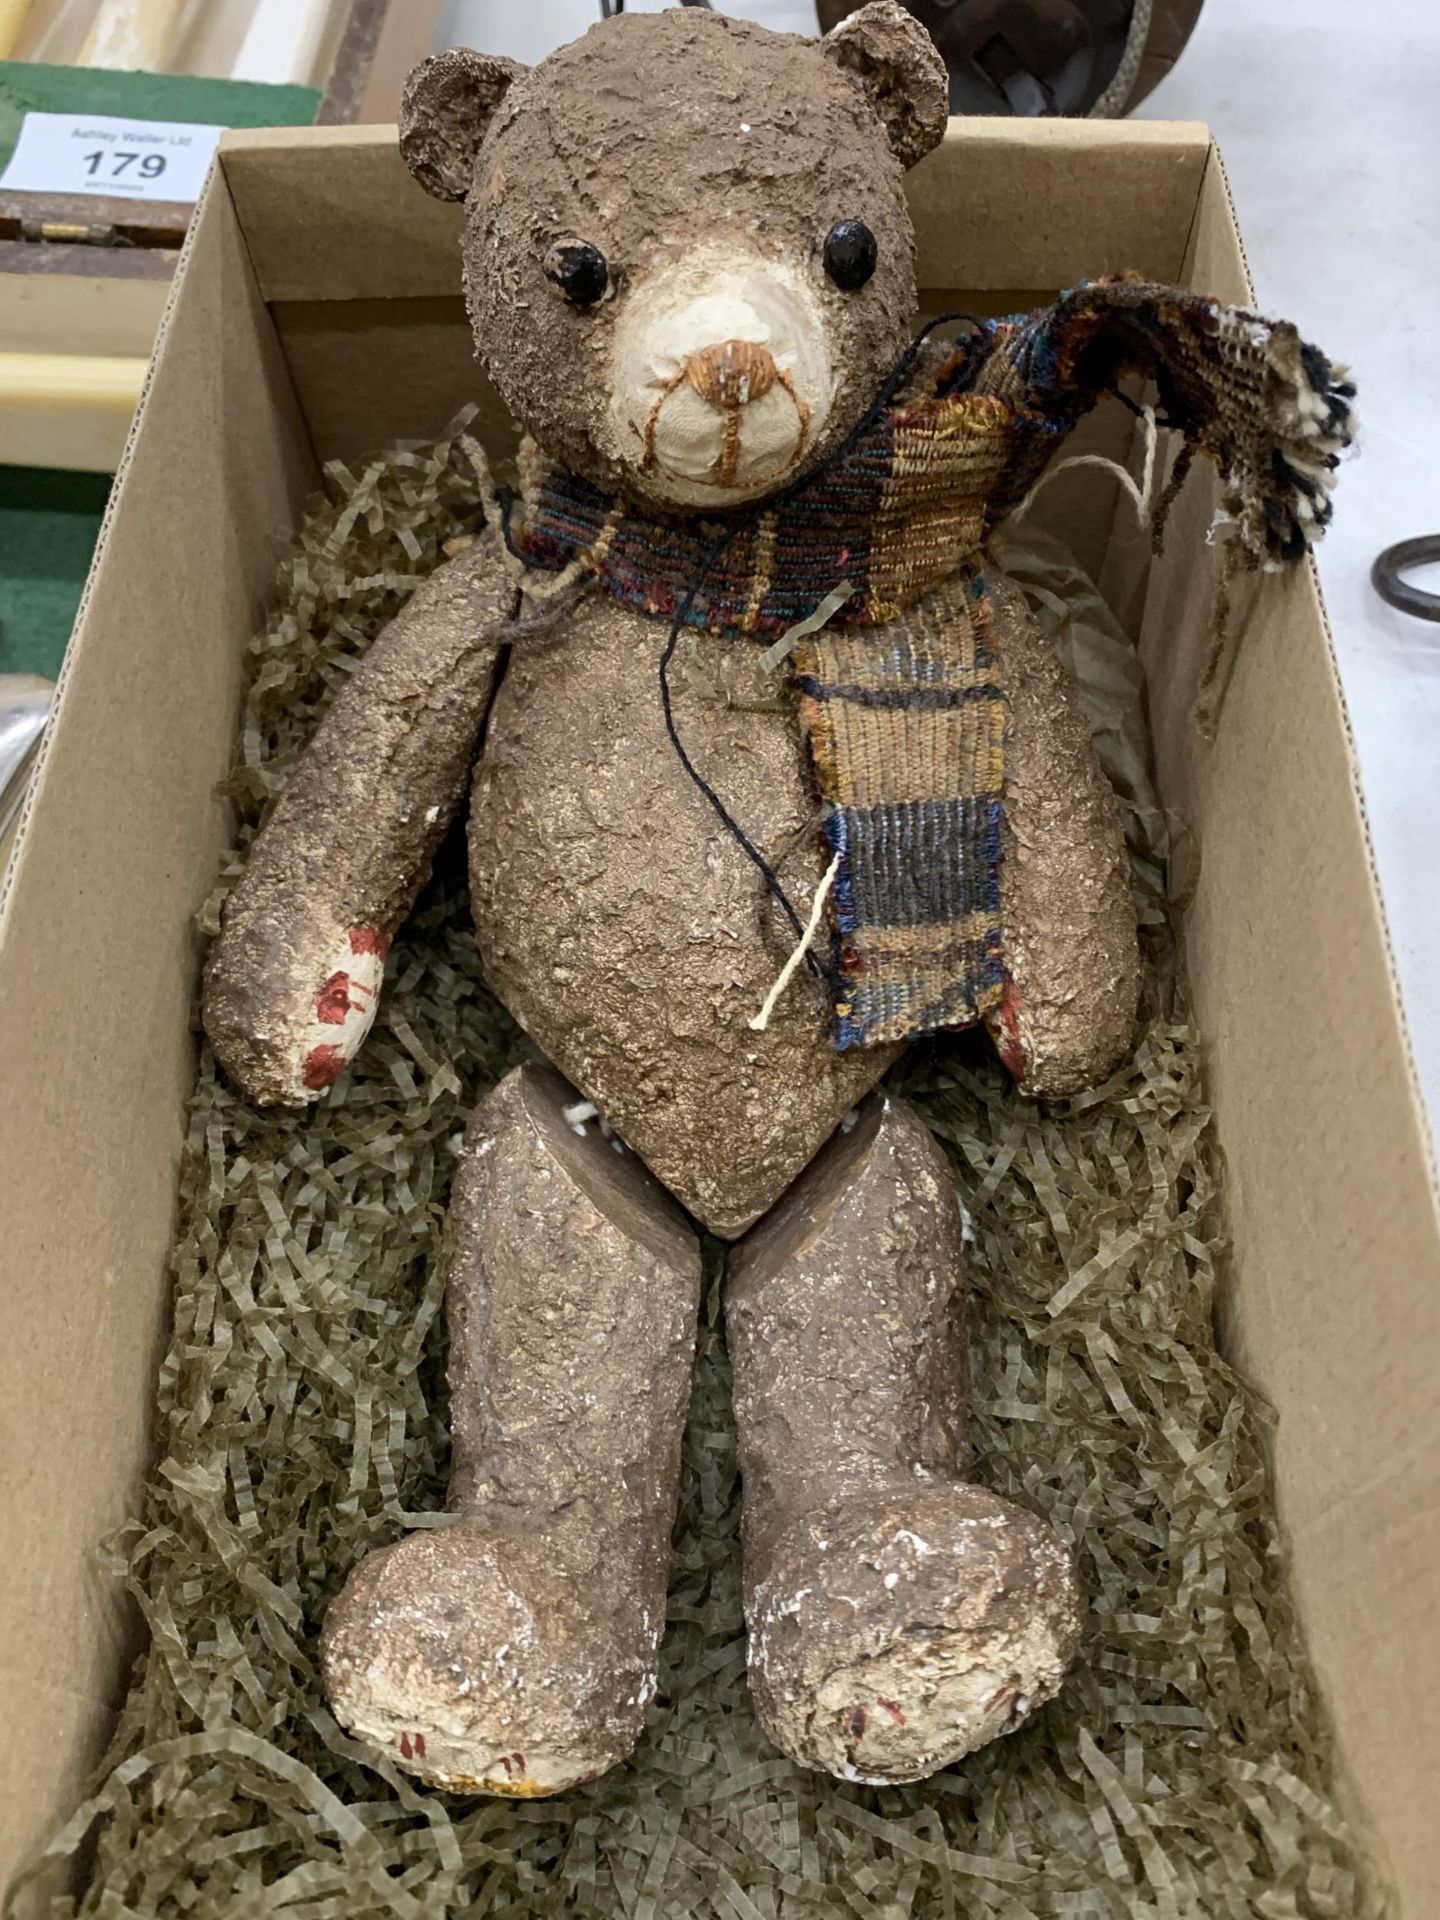 A BOXED 'STRING THINGS' TEDDY